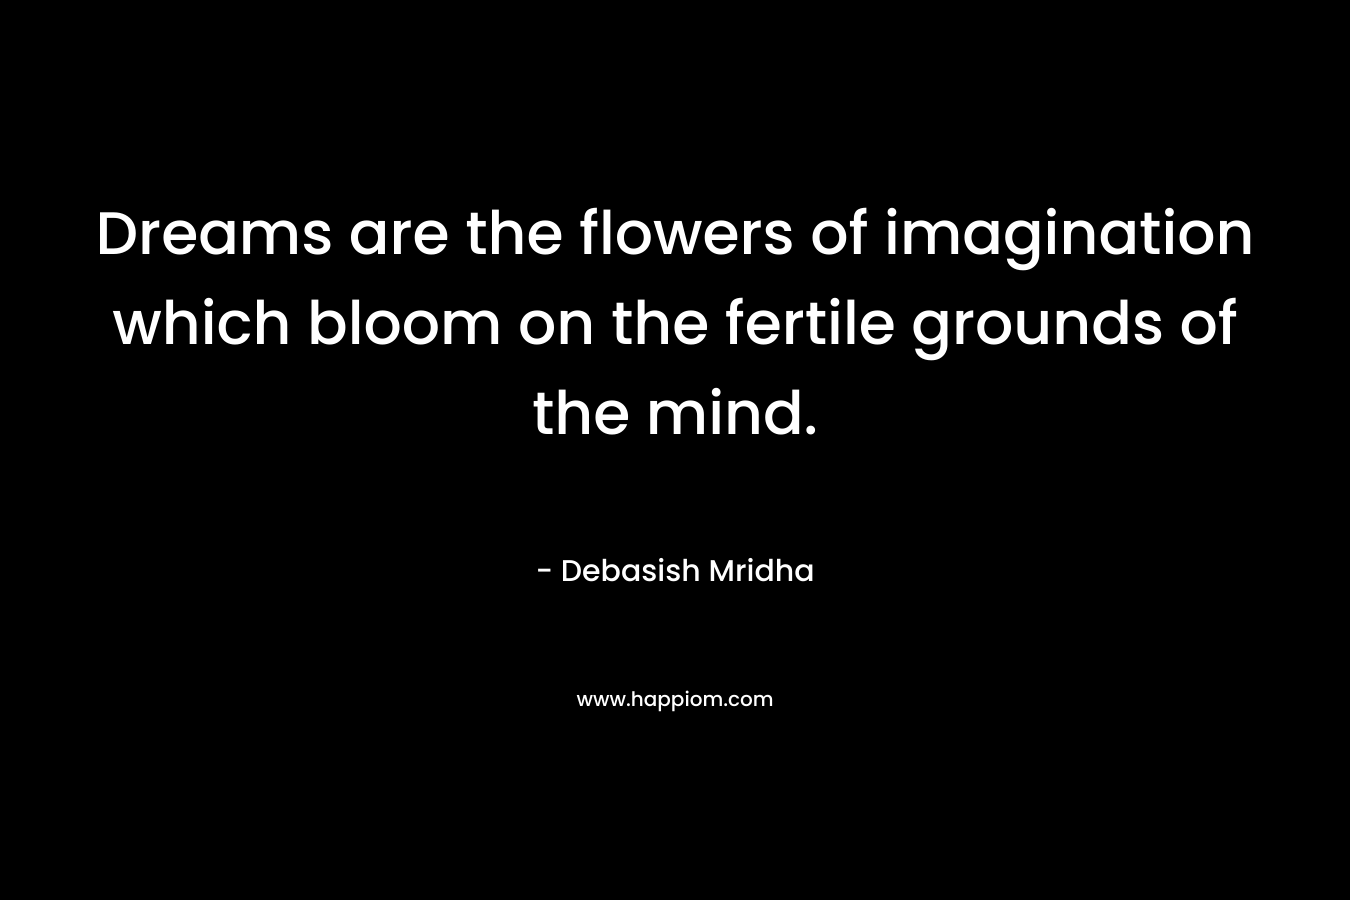 Dreams are the flowers of imagination which bloom on the fertile grounds of the mind. – Debasish Mridha